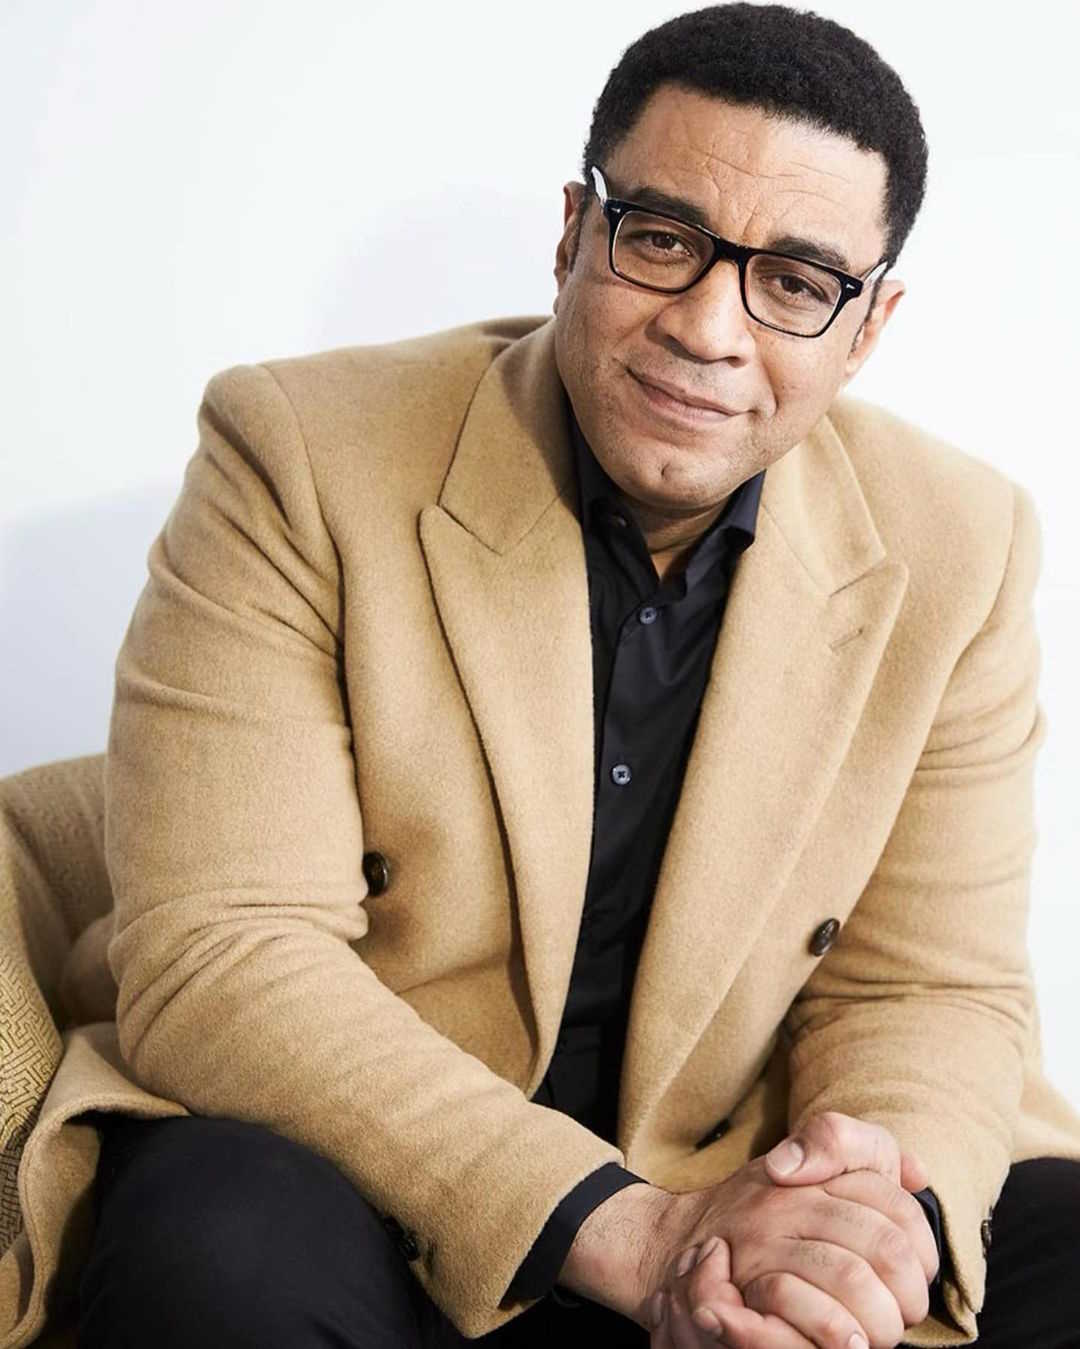 Harry Lennix Biography (Age, Height, Weight, Wife, Family, Career & More)